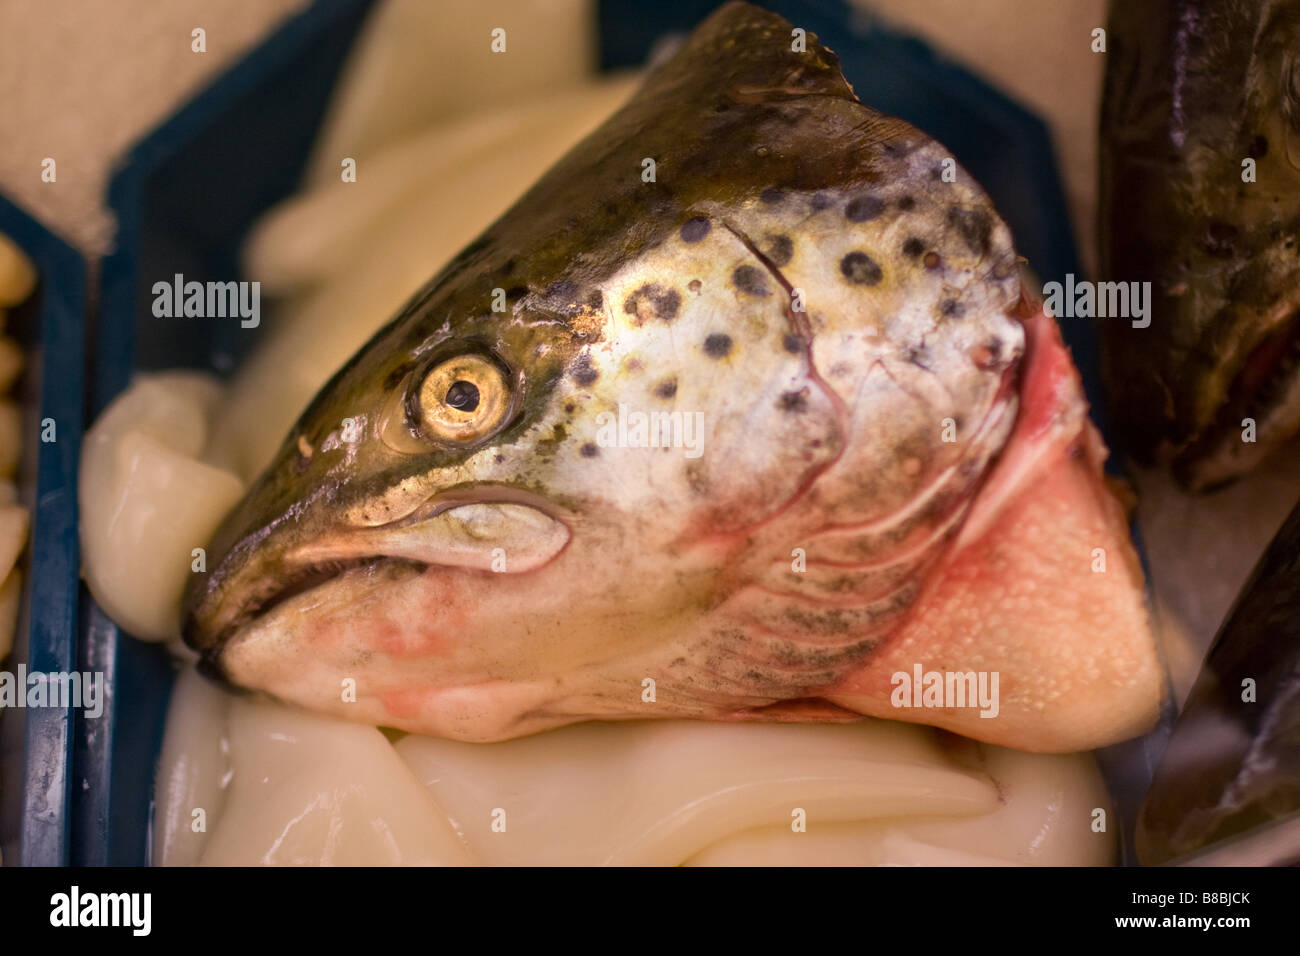 A Salmon head in a fresh fish case at a USA Supermarket Stock Photo